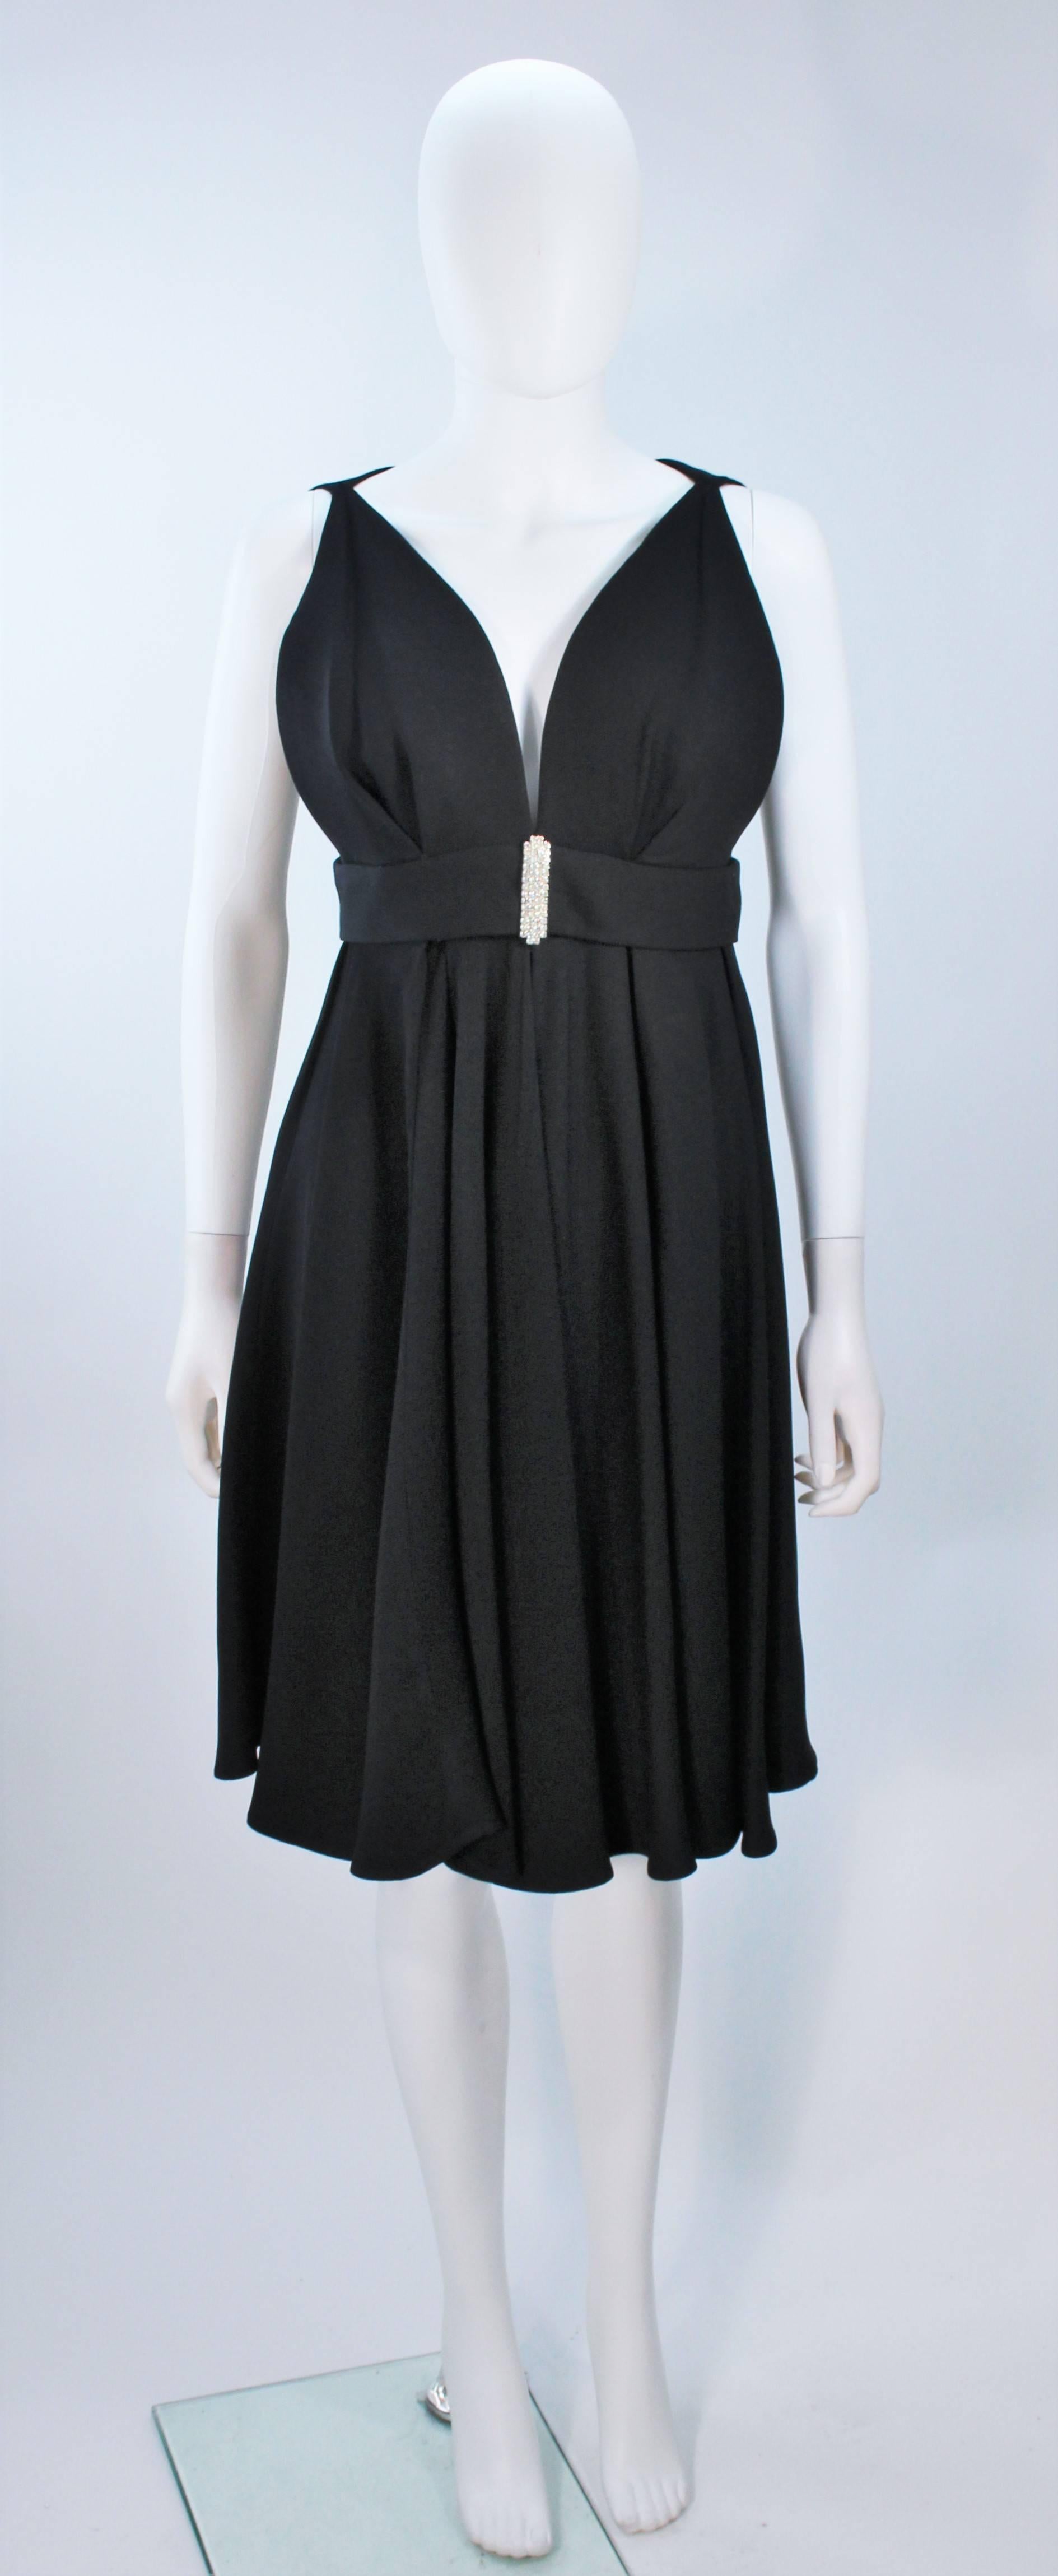  This dress is composed of a black silk crepe and features a center front rhinestone applique. This dress has an amazing design. Center back zipper closure. In excellent vintage condition. 
 
  **Please cross-reference measurements for personal